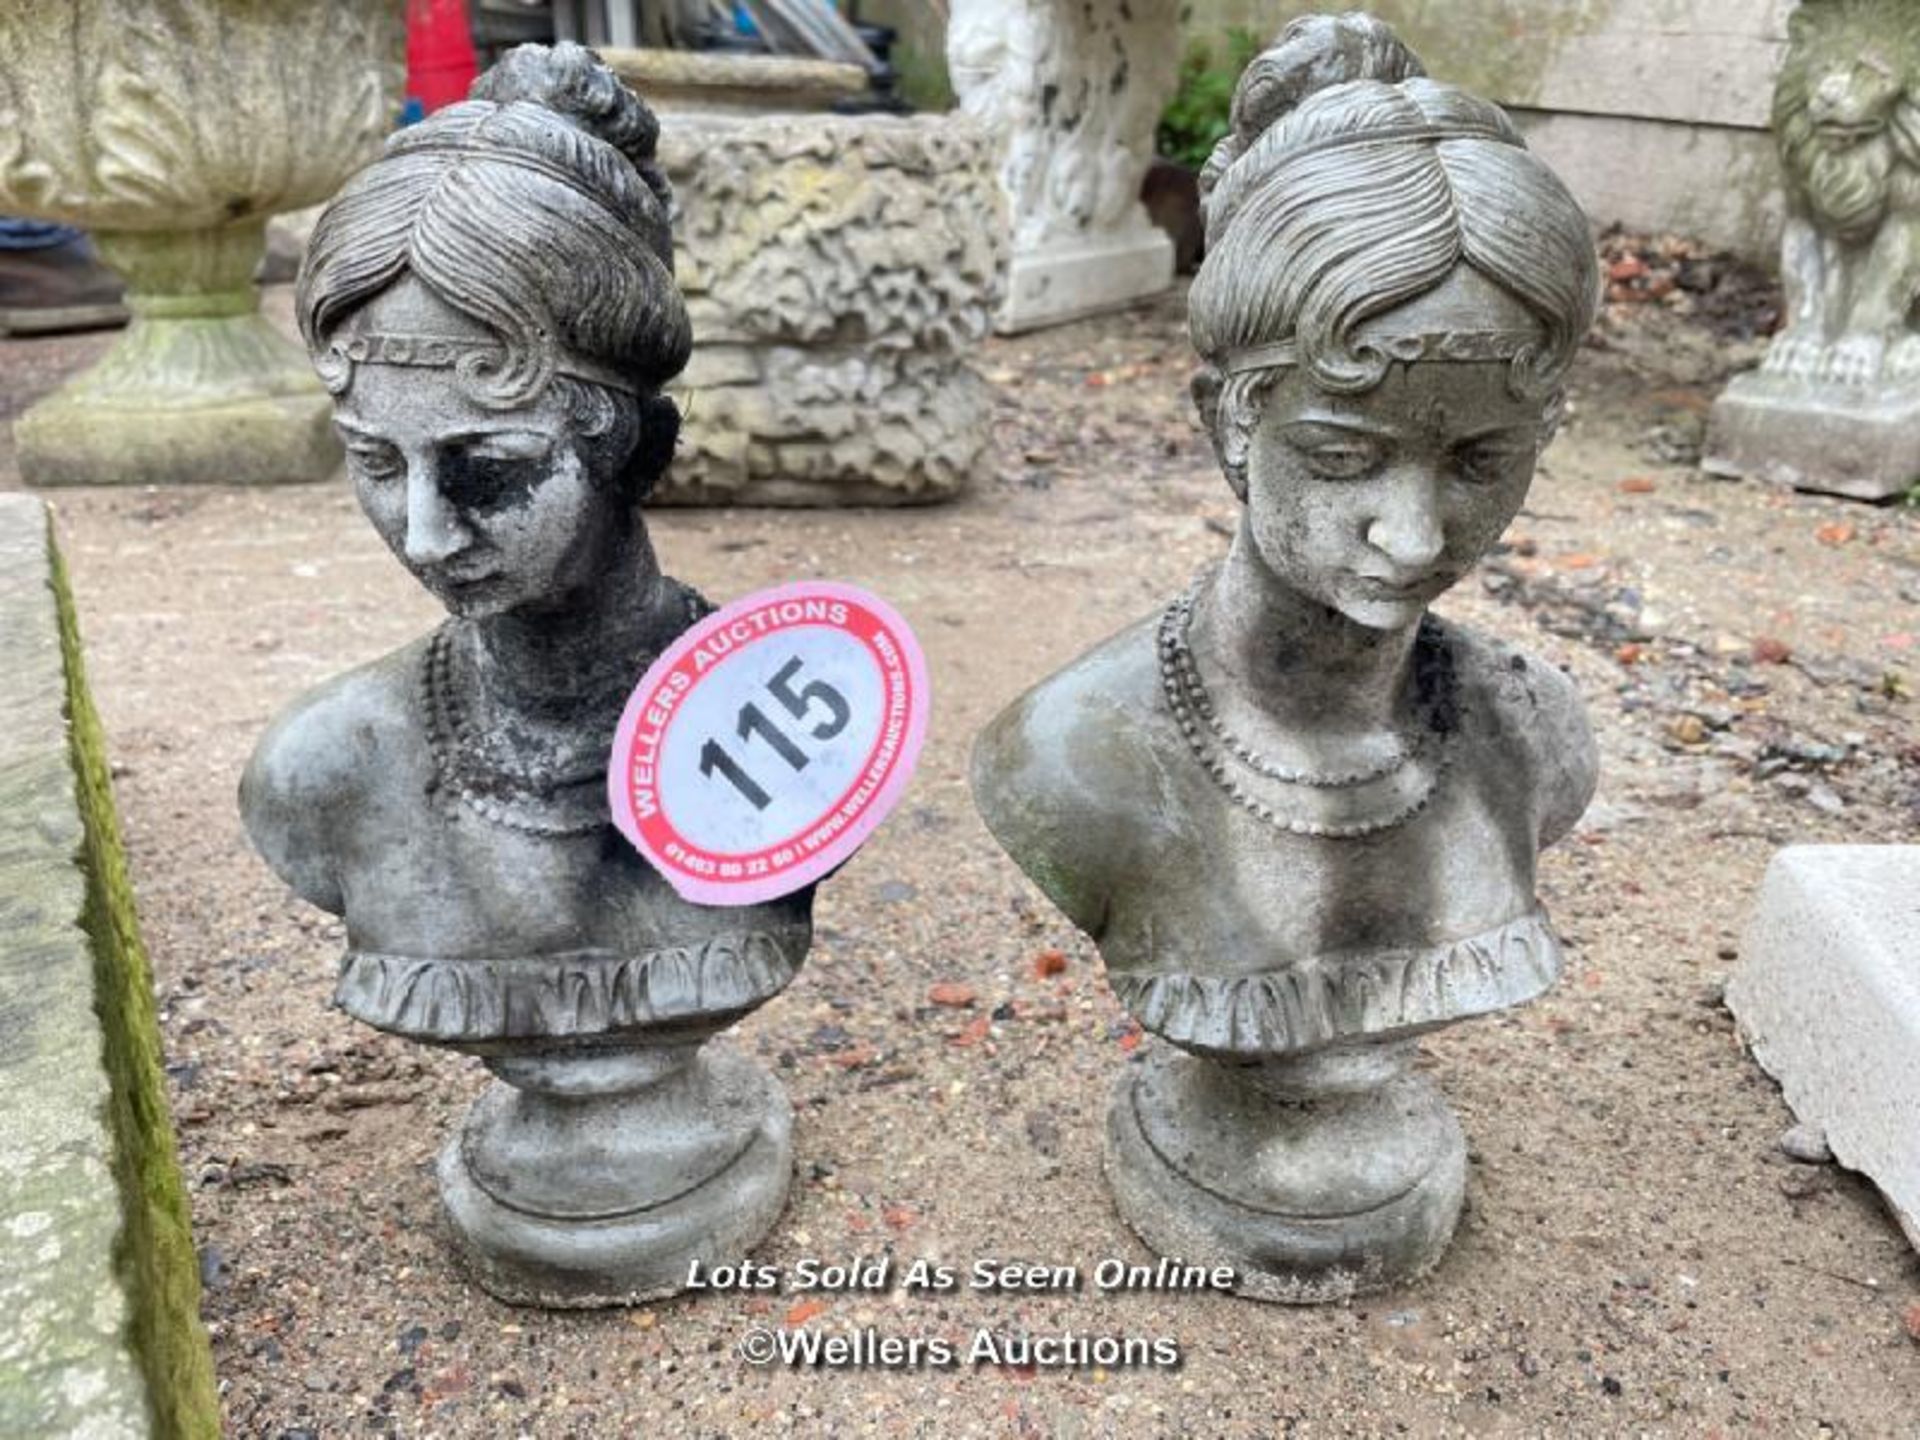 *MATCHING PAIR OF STONE BUSTS, BOTH 14 INCHES HIGH / ALL LOTS ARE LOCATED AT AUTHENTIC RECLAMATION